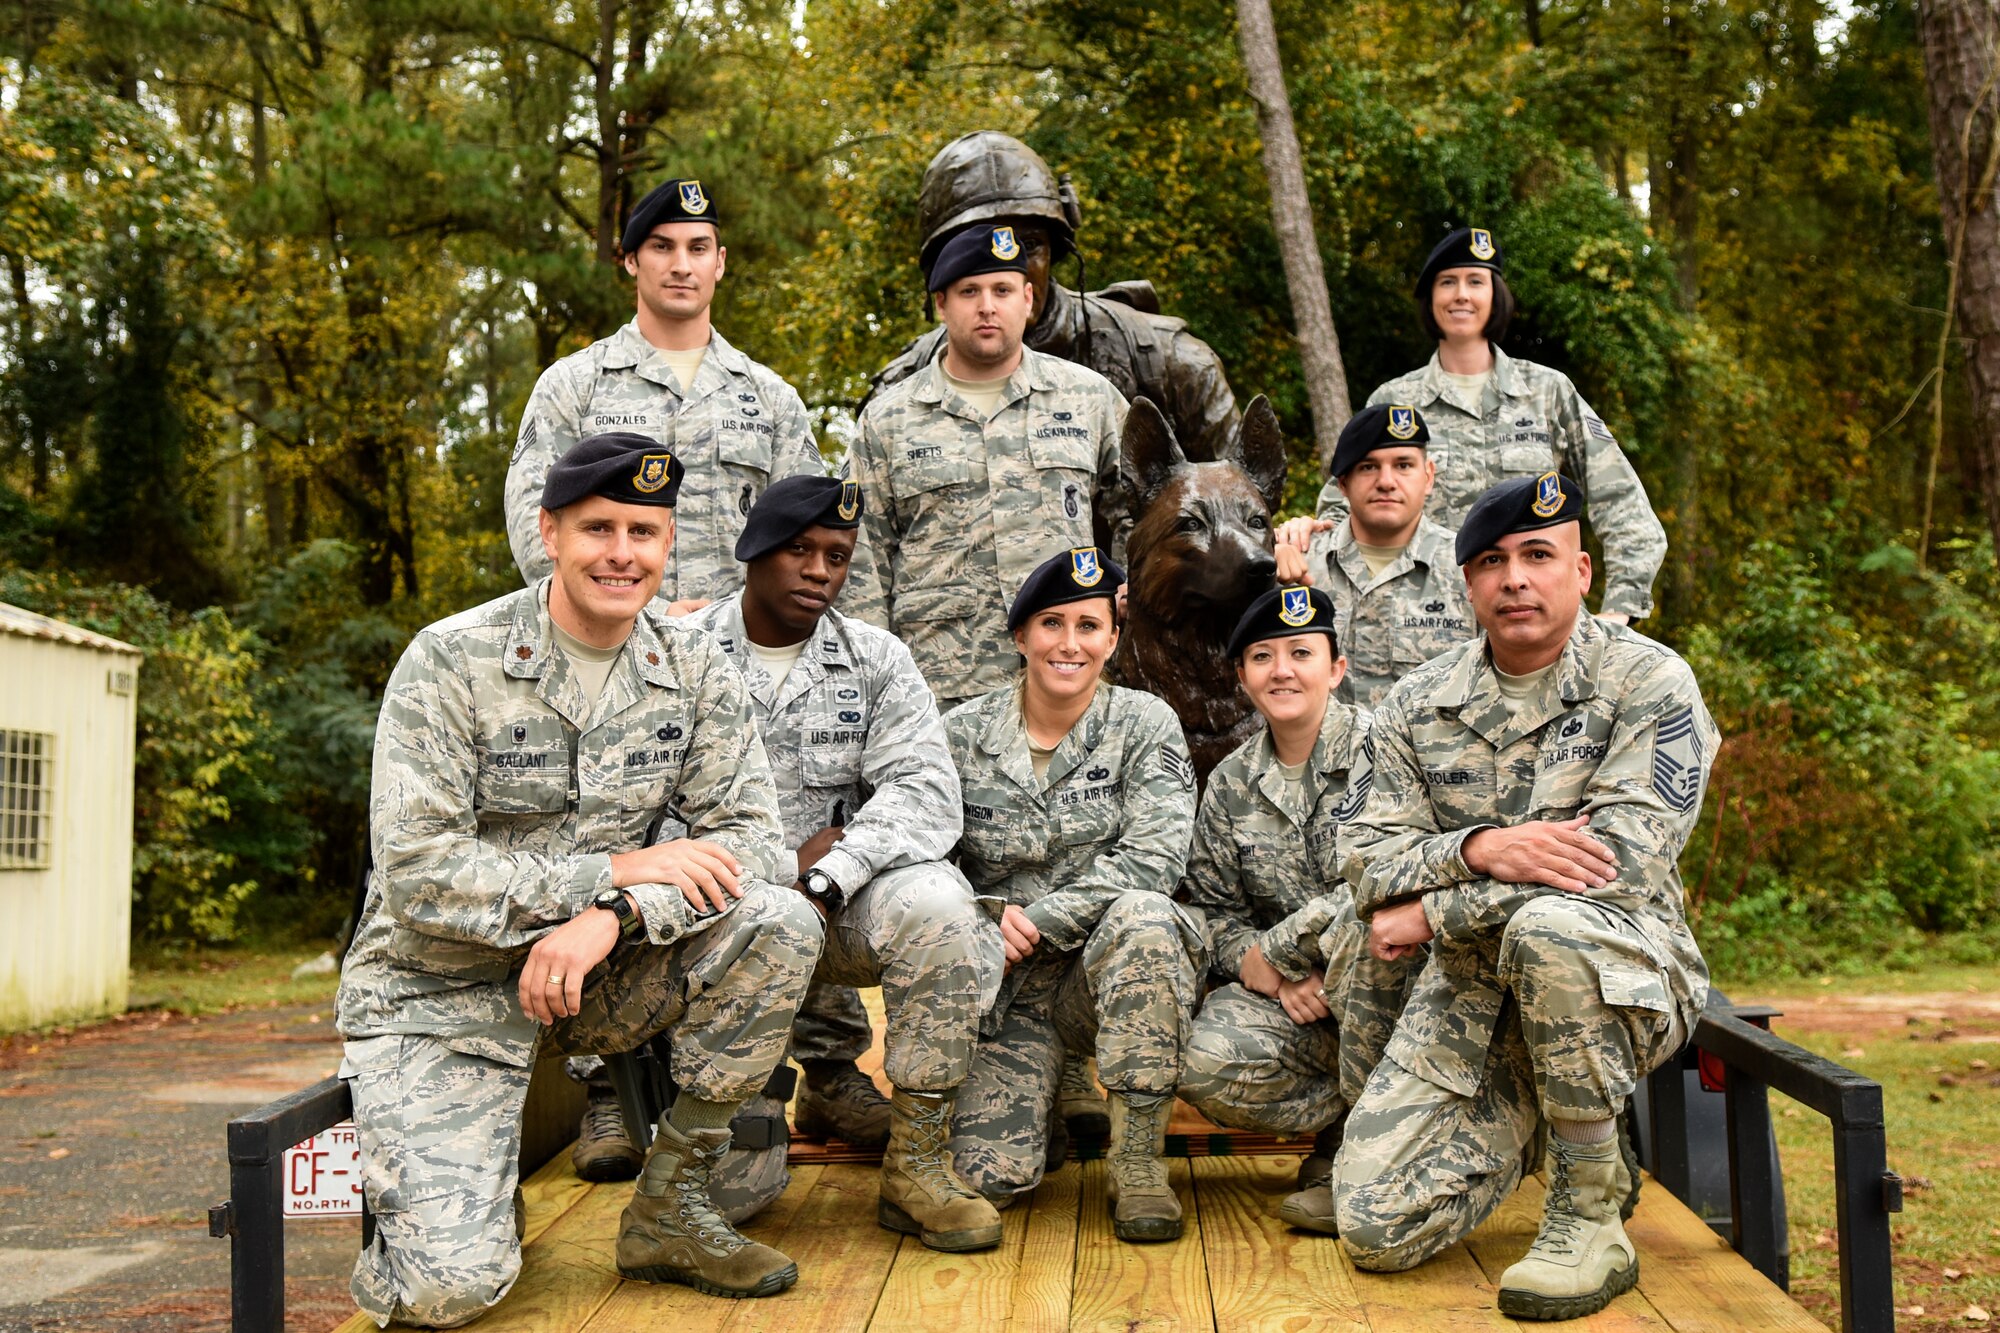 Airmen from the 4th Security Forces Squadron pose with the War Dog Memorial statue, Oct. 27, 2015, at Seymour Johnson Air Force Base, North Carolina. The statue traveled around North Carolina to different military installations before heading to its permanent home at the Veterans Memorial Park in Columbia, South Carolina. (U.S. Air Force photo/Airman Shawna L. Keyes)   